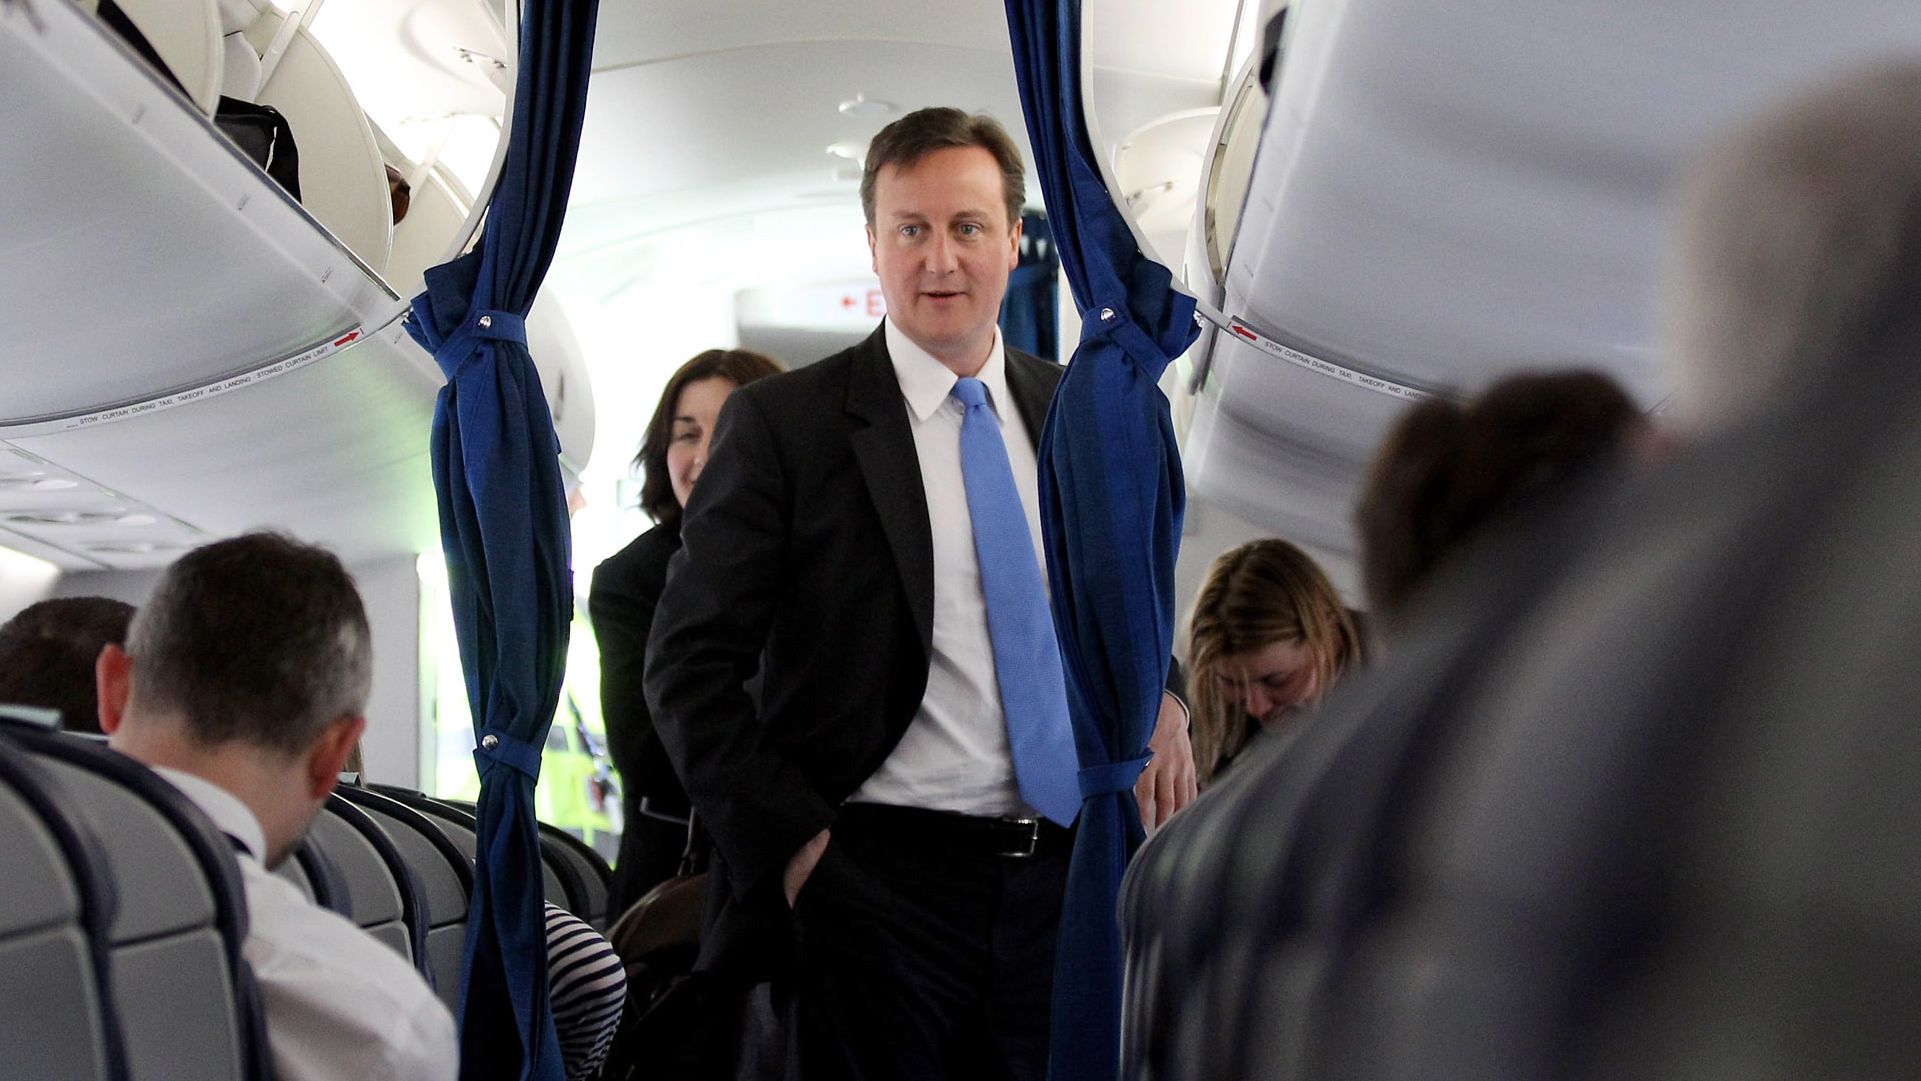 David Cameron on board a flight in 2010, when he was Conservative Party leader